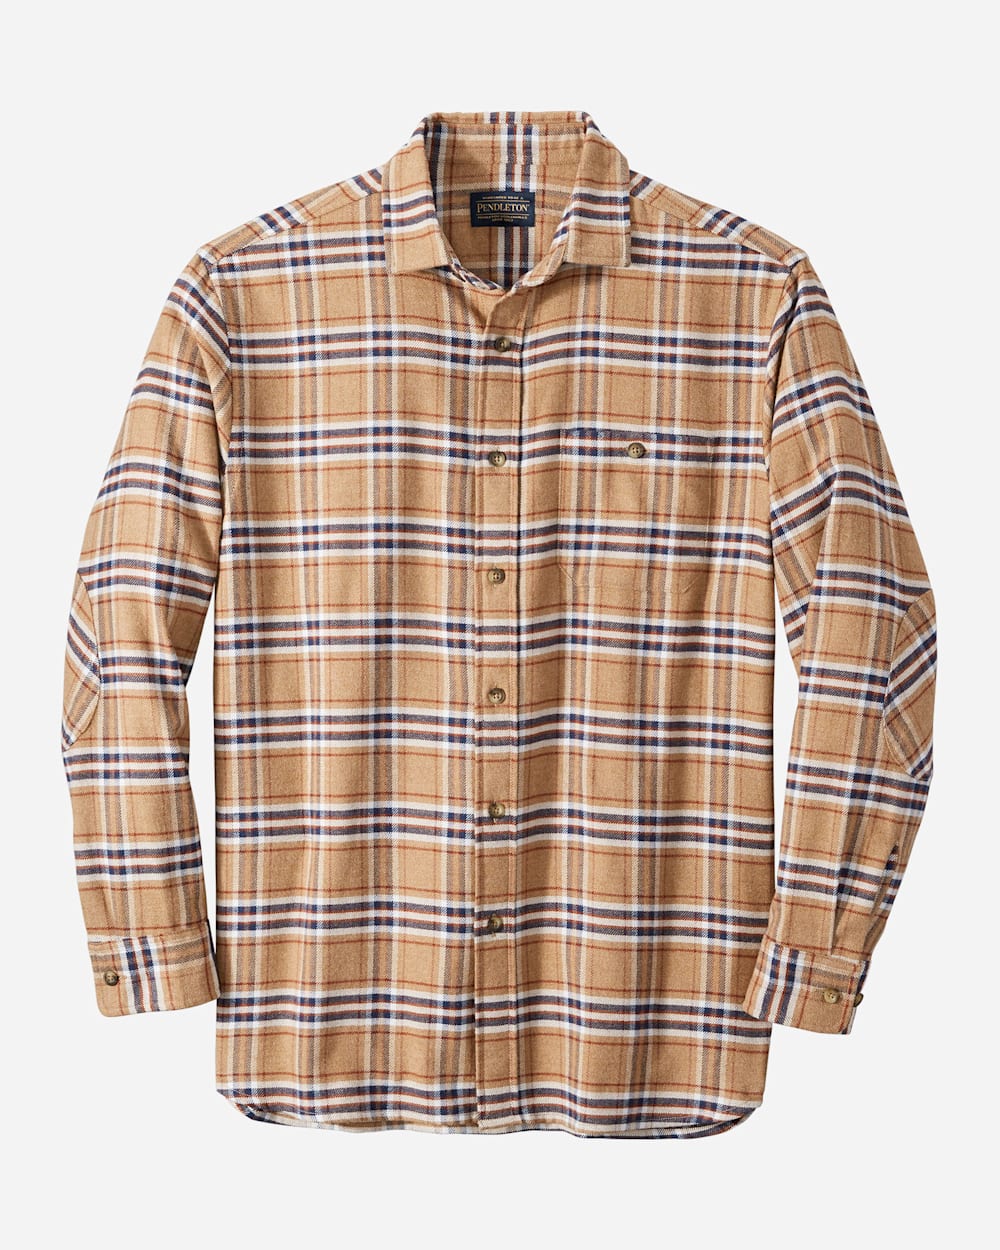 MEN'S CASCADE FLANNEL SHIRT IN CAMEL/NAVY/RUST PLAID image number 1